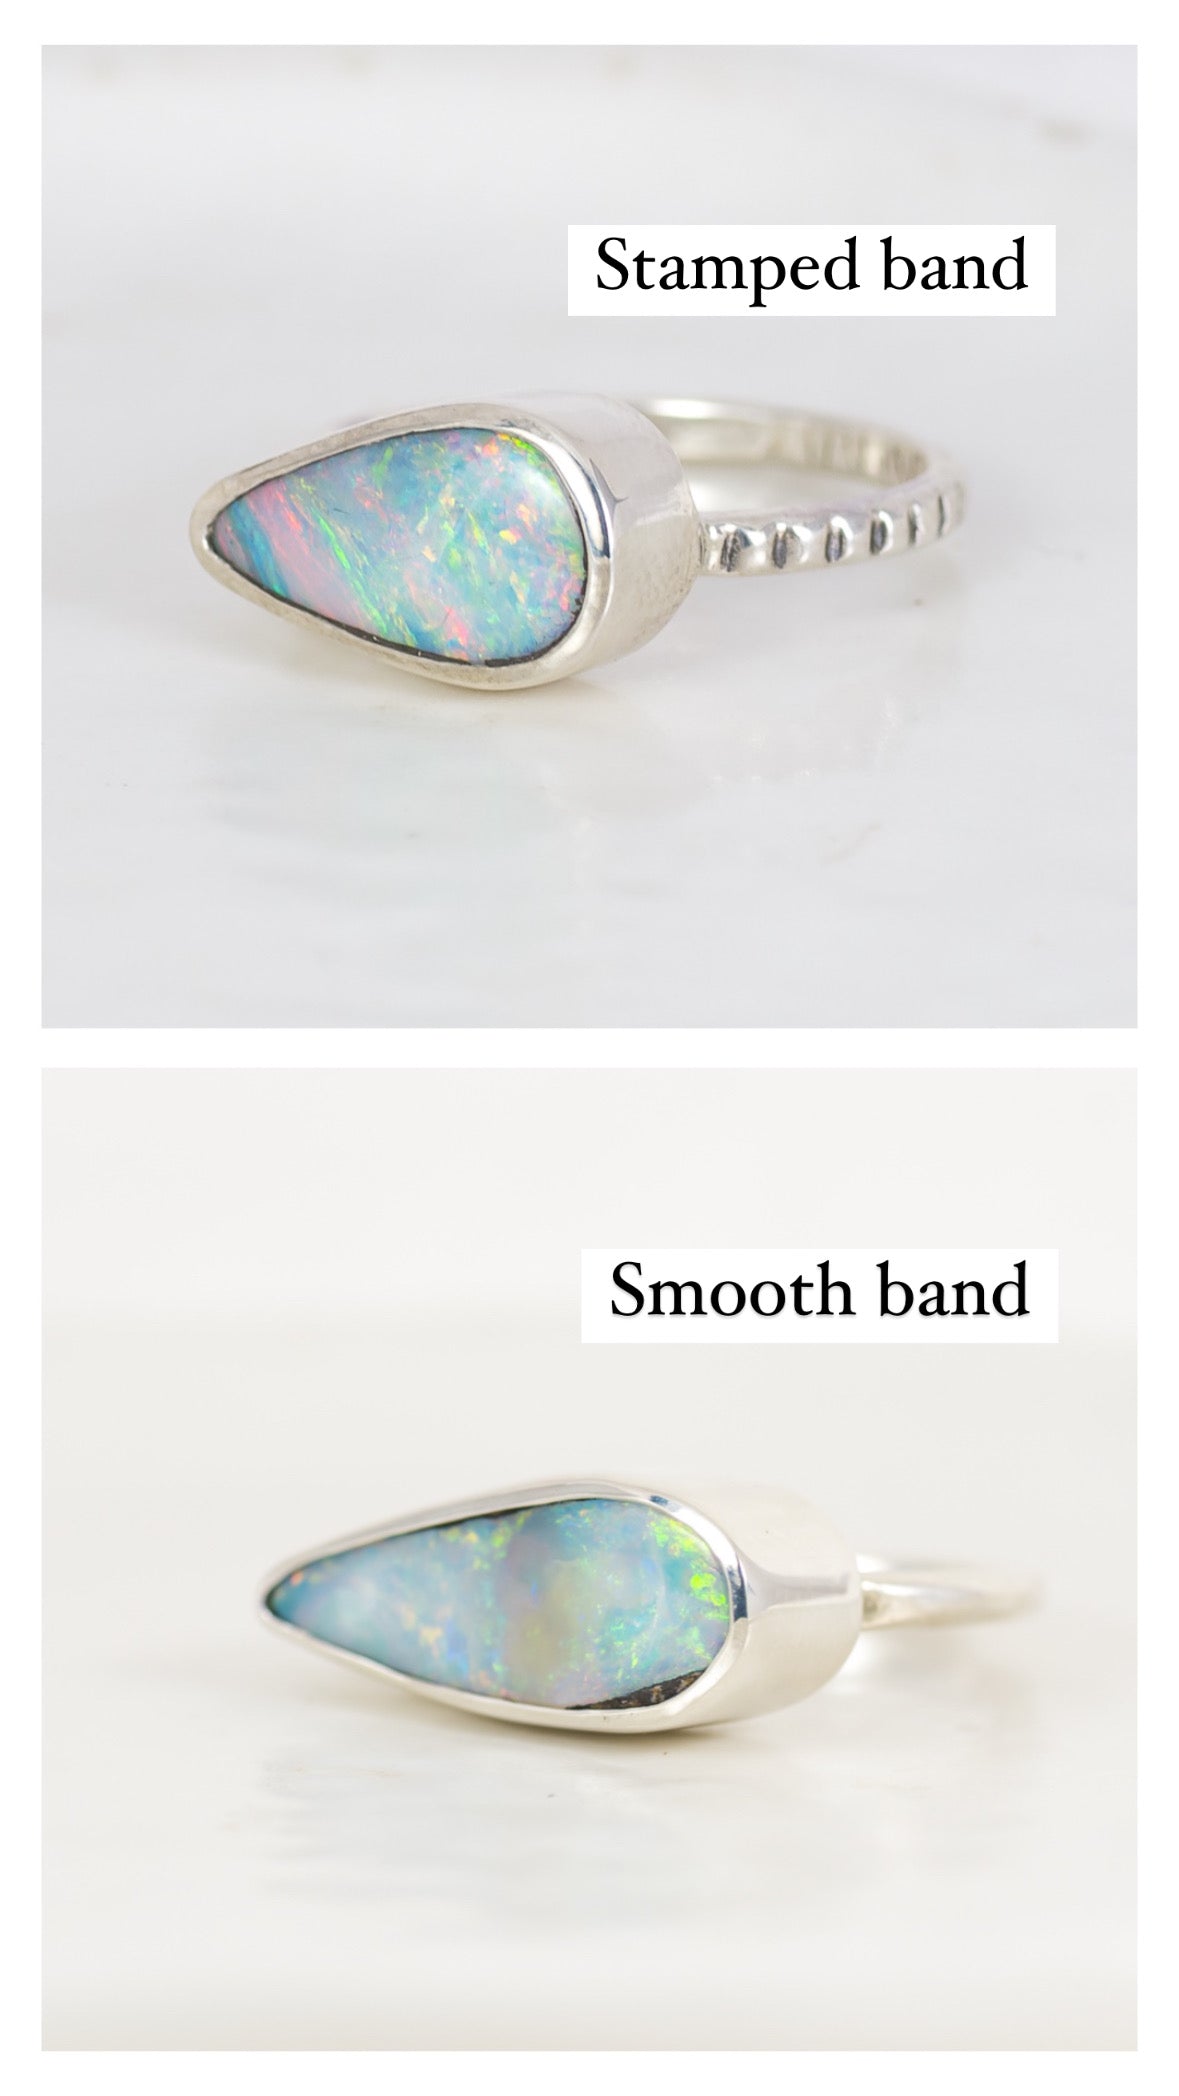 Opal East West Ring #4 (Pre-Order) ◇ Australian Opal ◇ Made in your size